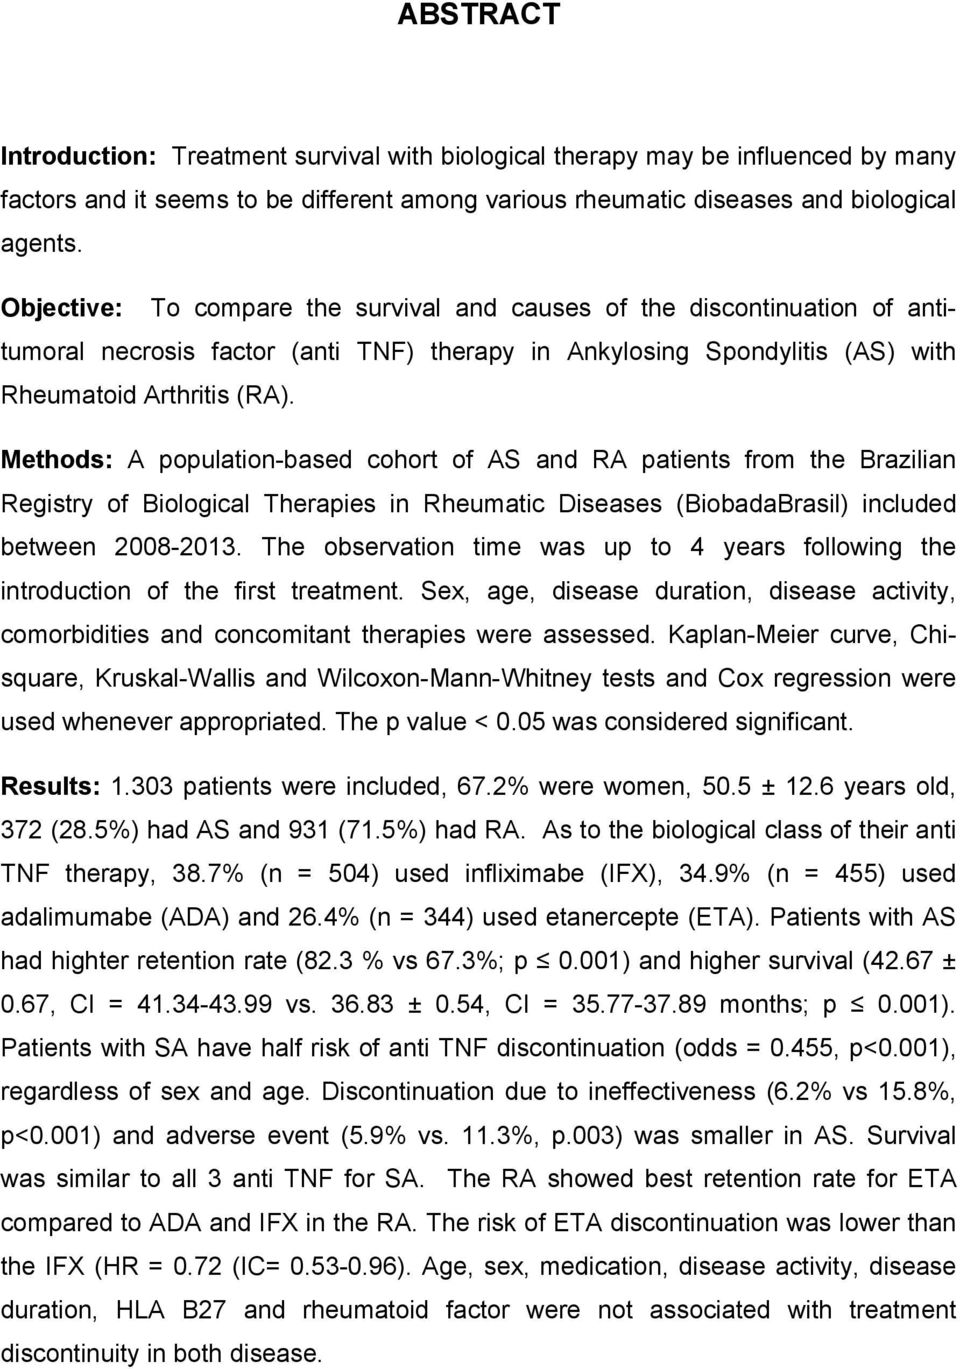 Methods: A population-based cohort of AS and RA patients from the Brazilian Registry of Biological Therapies in Rheumatic Diseases (BiobadaBrasil) included between 2008-2013.